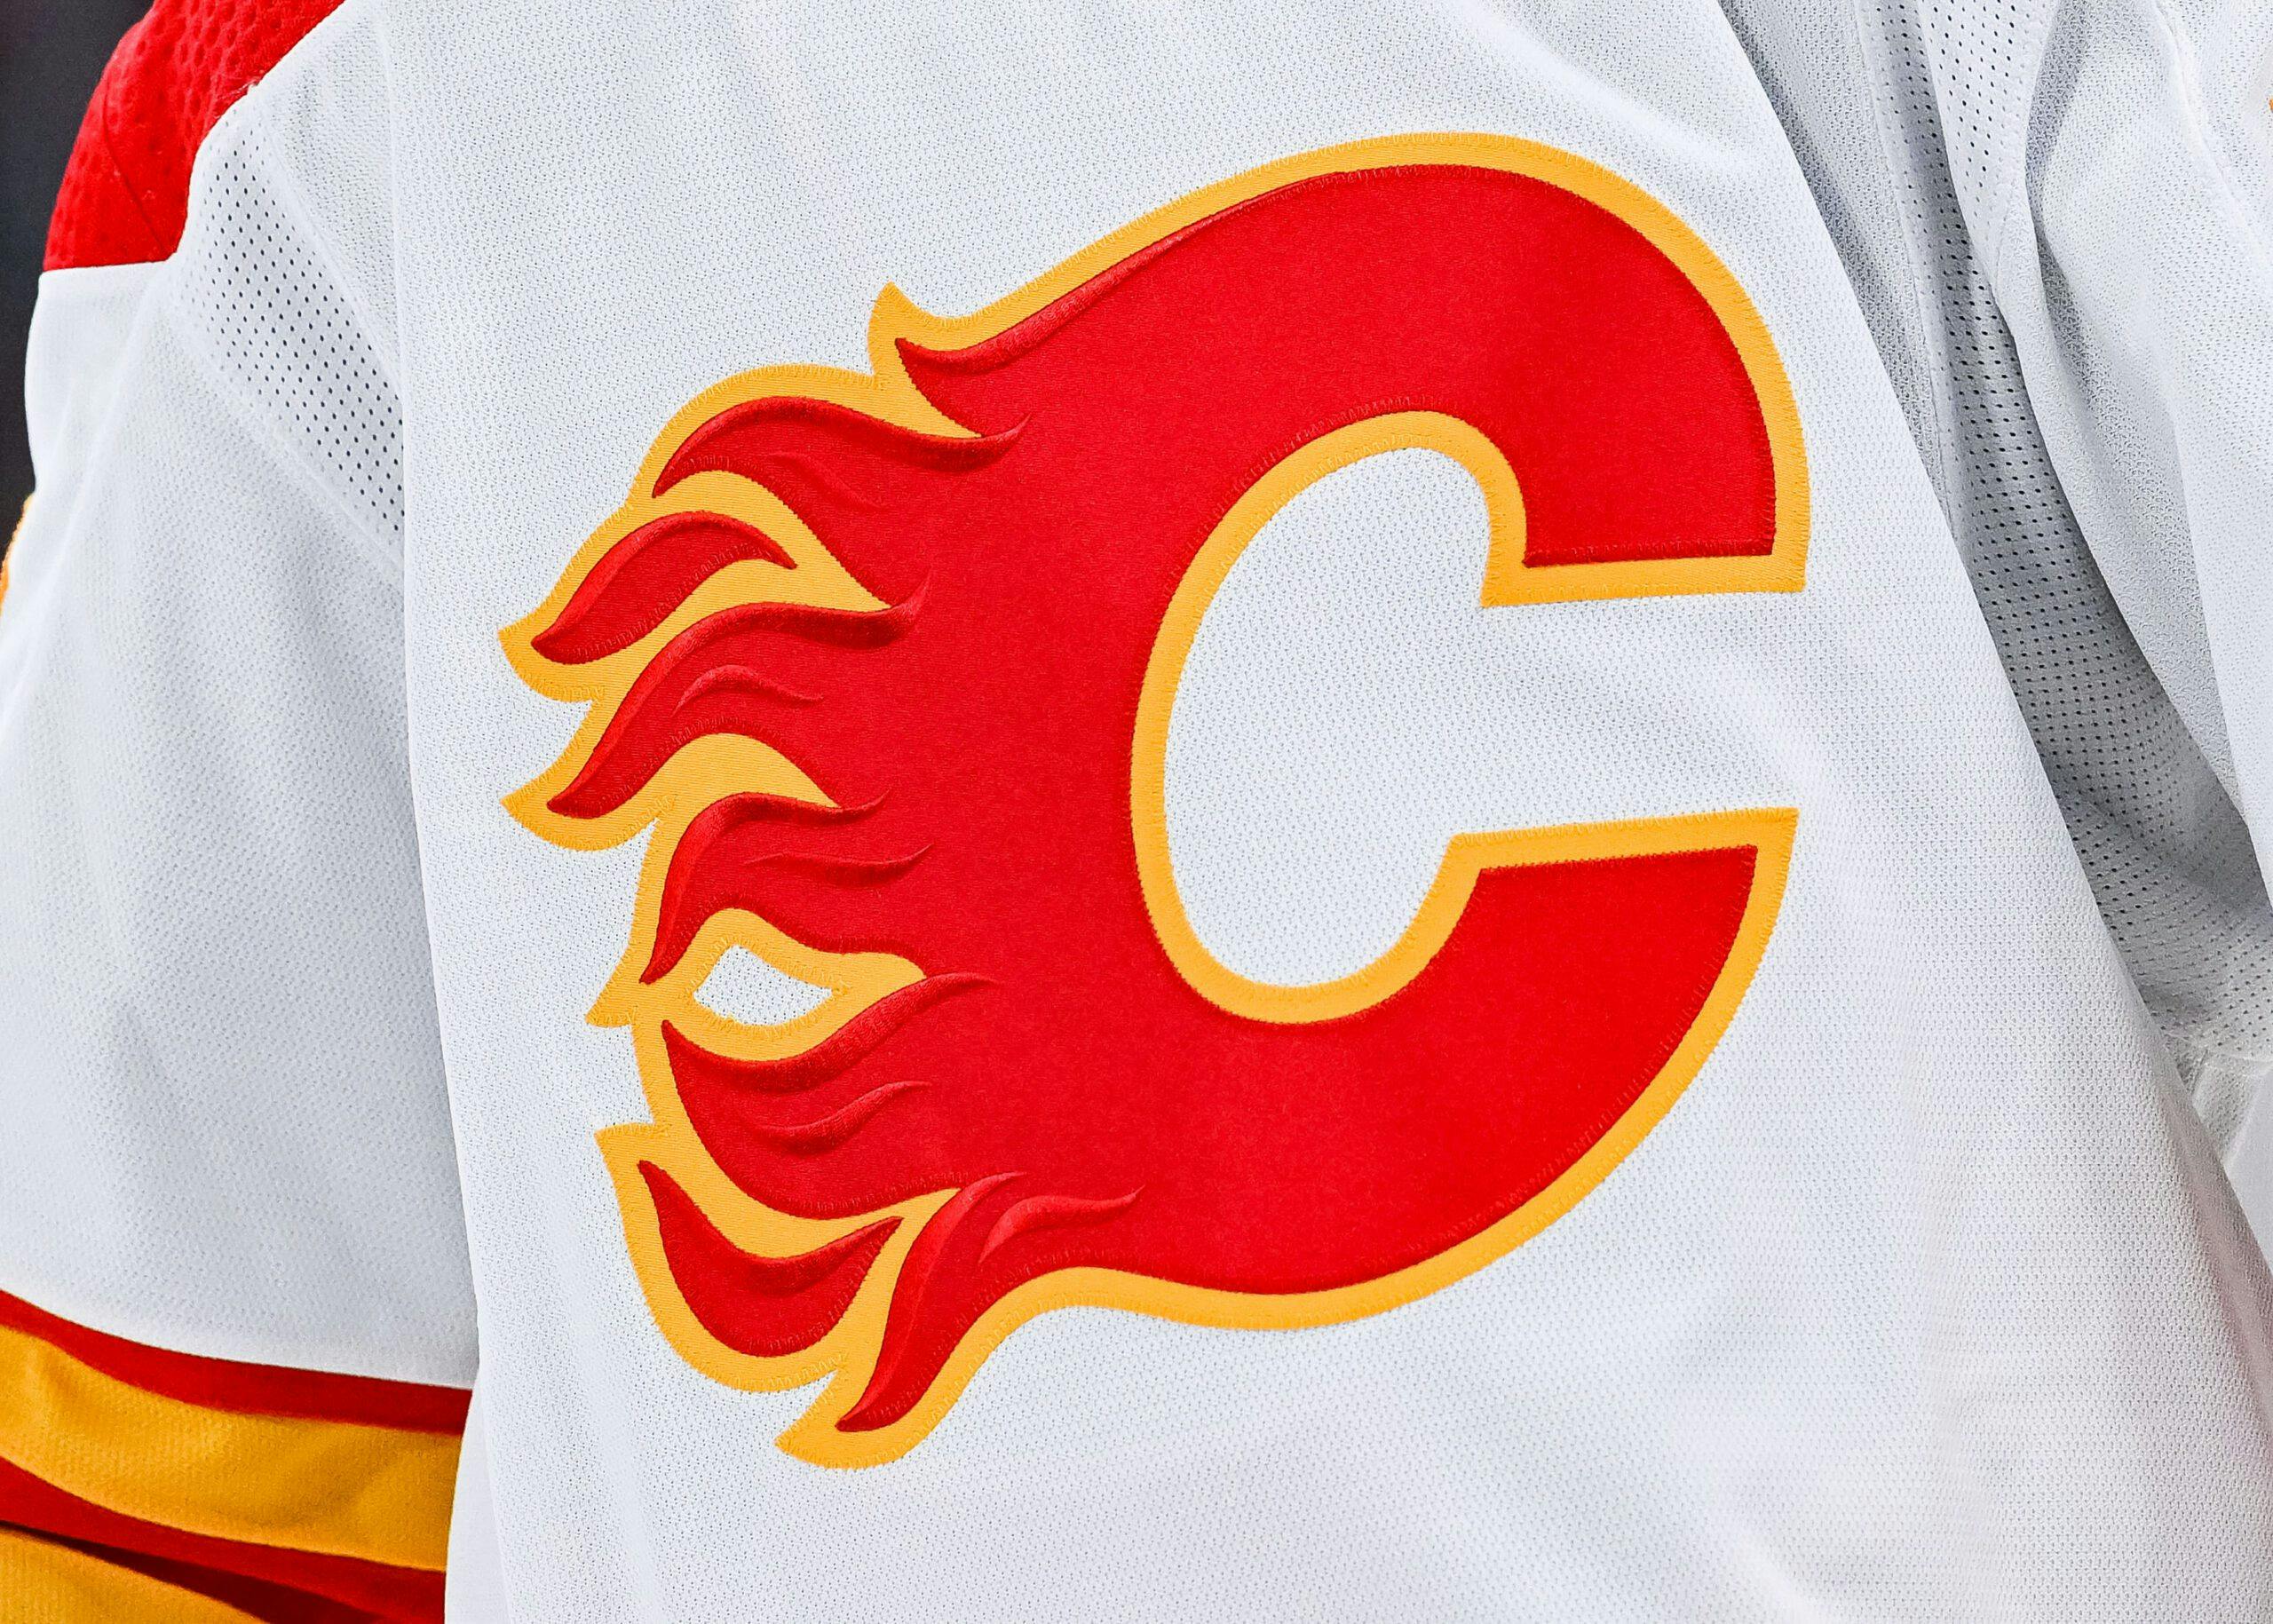 Calgary Flames assistant GM Chris Snow passes away after suffering brain injury